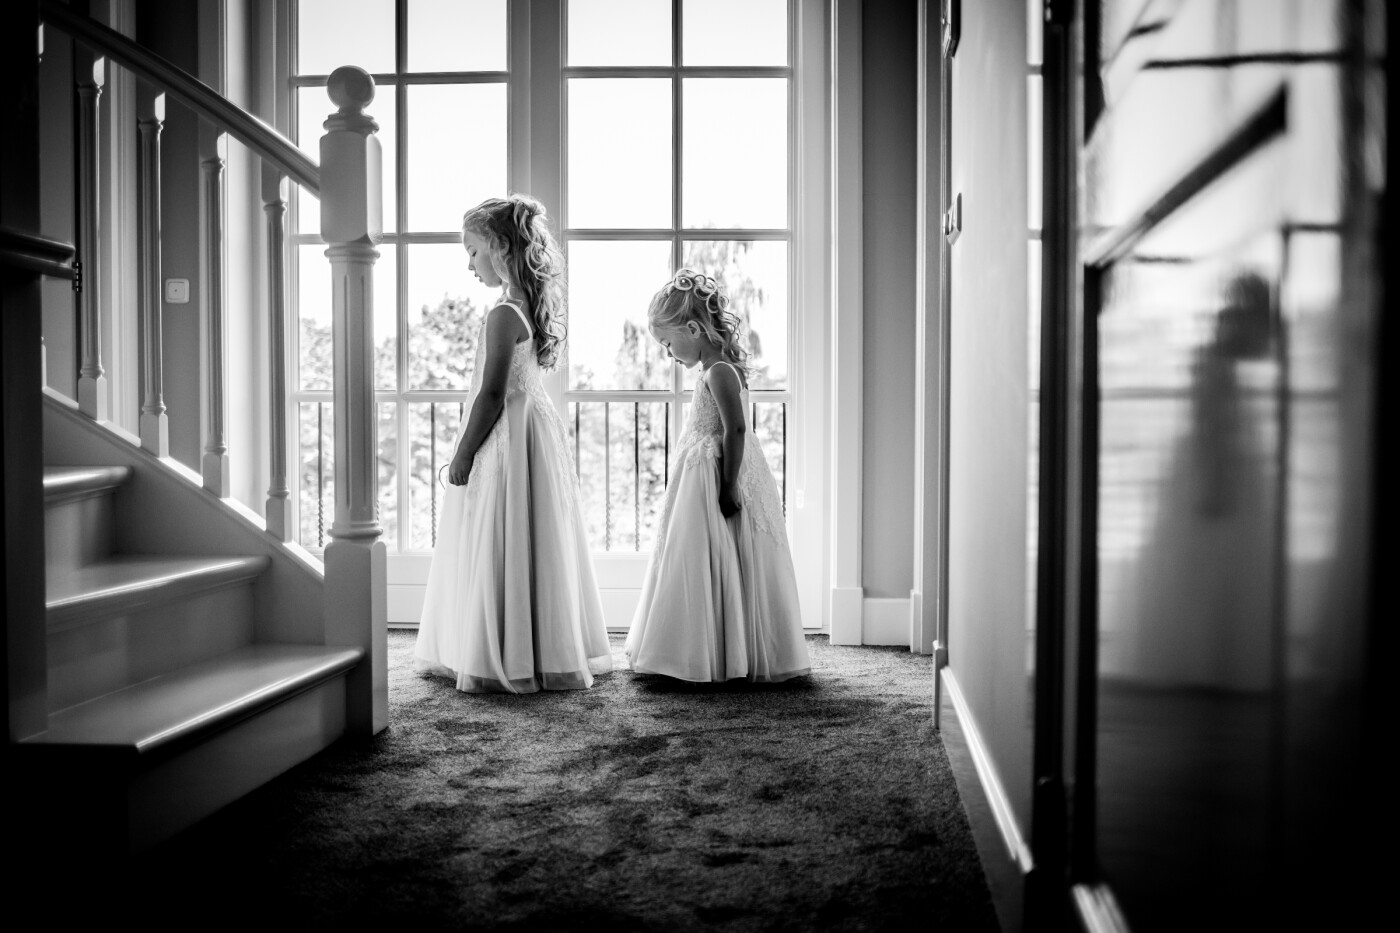 Two little Princesses <br />
<br />
These two little princesses had the exact same dress as their (bride)mum. The house where the preparations were being made for the weddingday was absolutely stunning. I was sitting in the hallway just waiting for a magic moment to happen as I knew the girls would come out of the room and show their precious-one-day-in-a-life dress to everyone. I loved the surroundings, the light, and these two beautiful girls. 